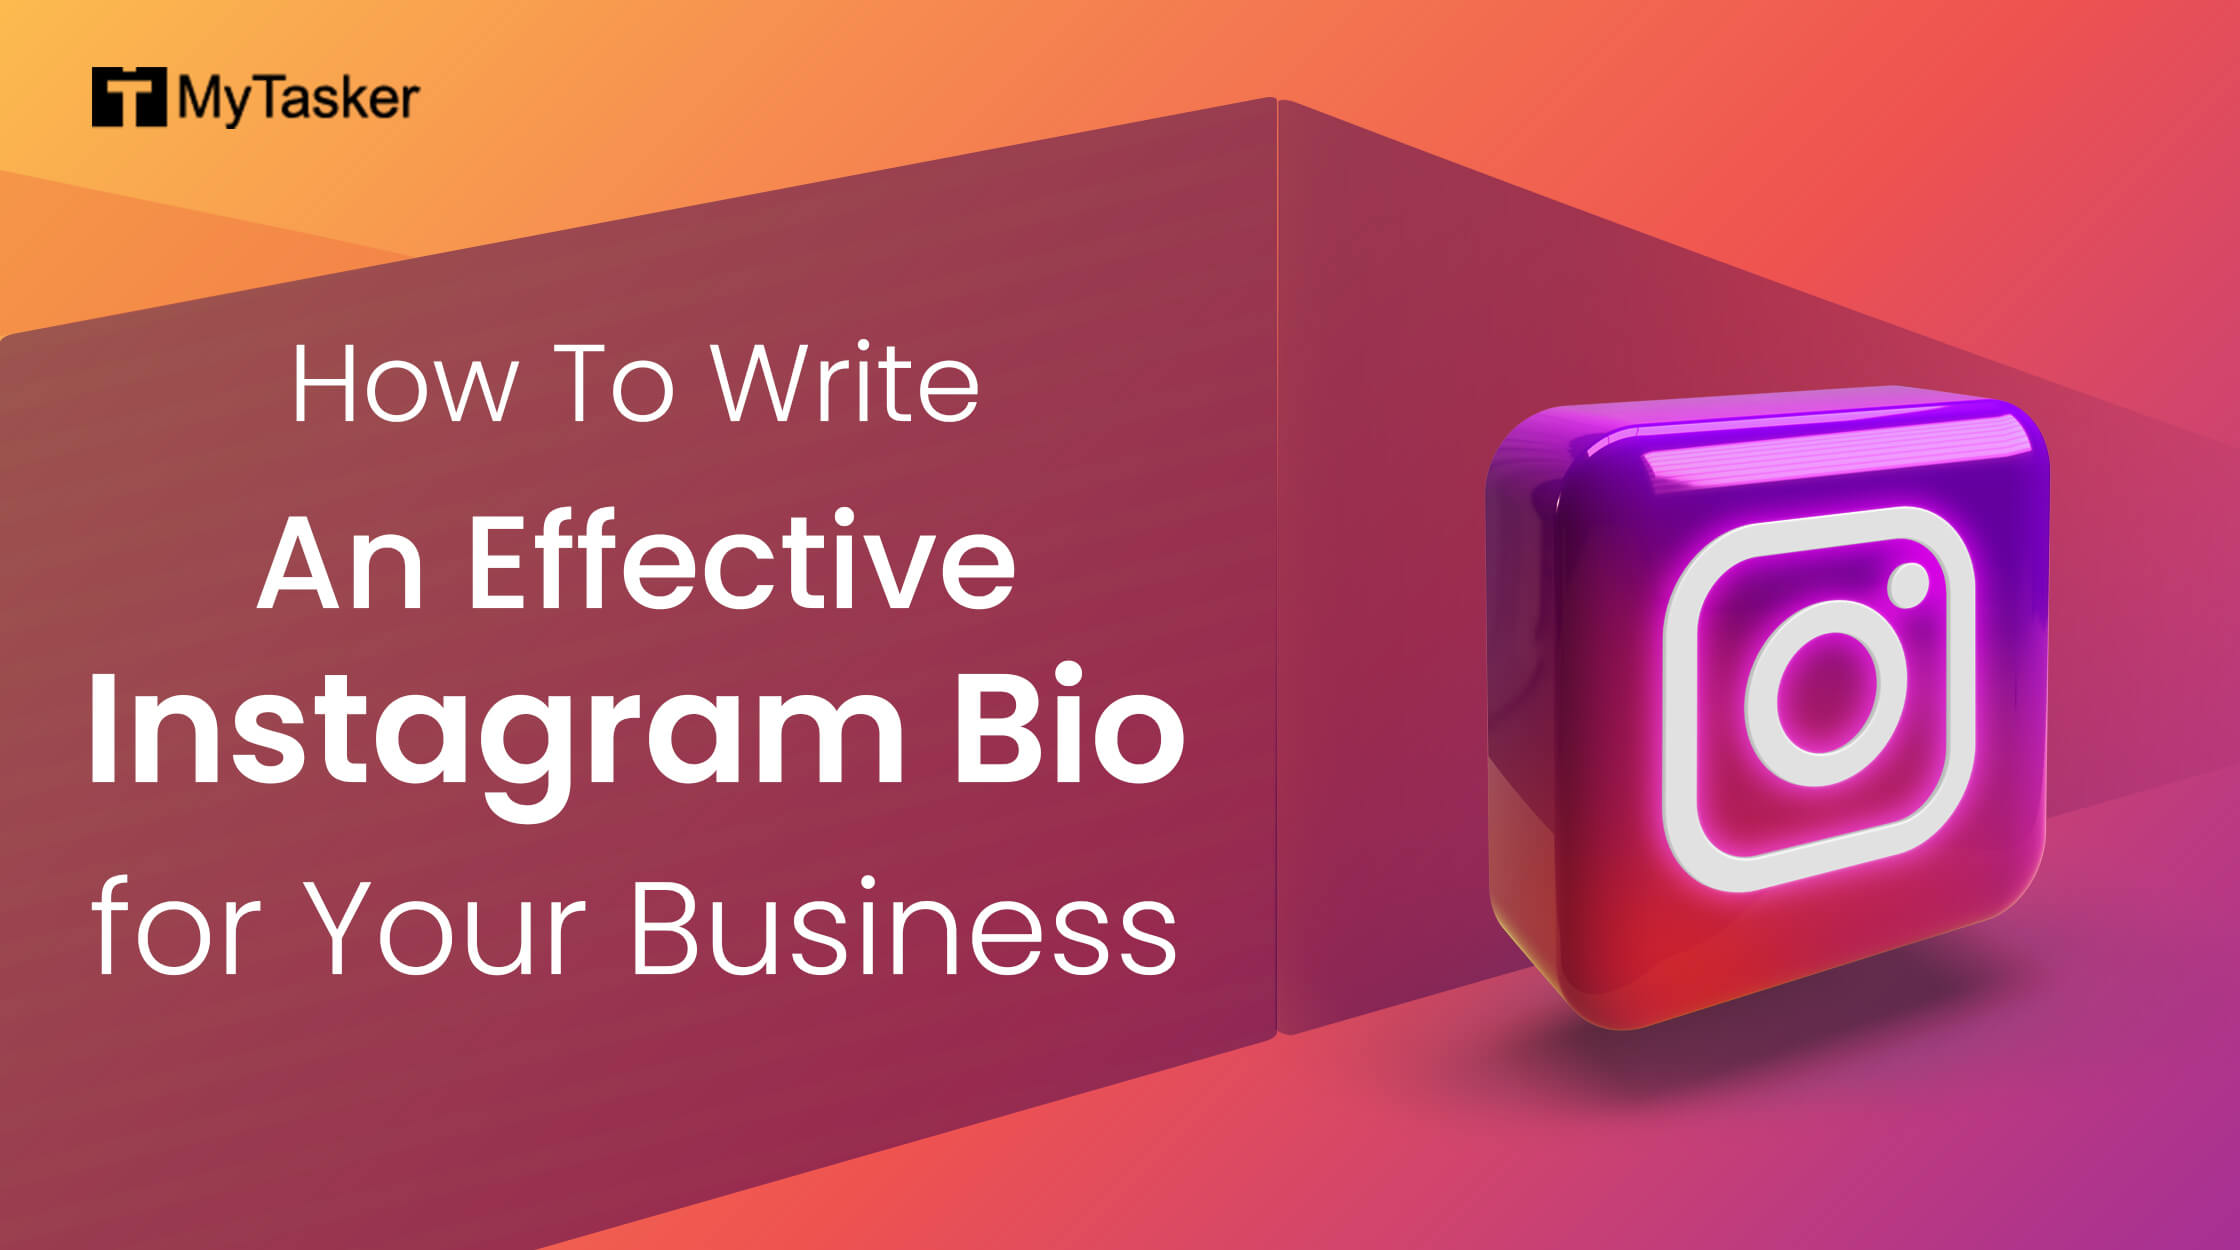 How To Write An Effective Instagram Bio for Your Business